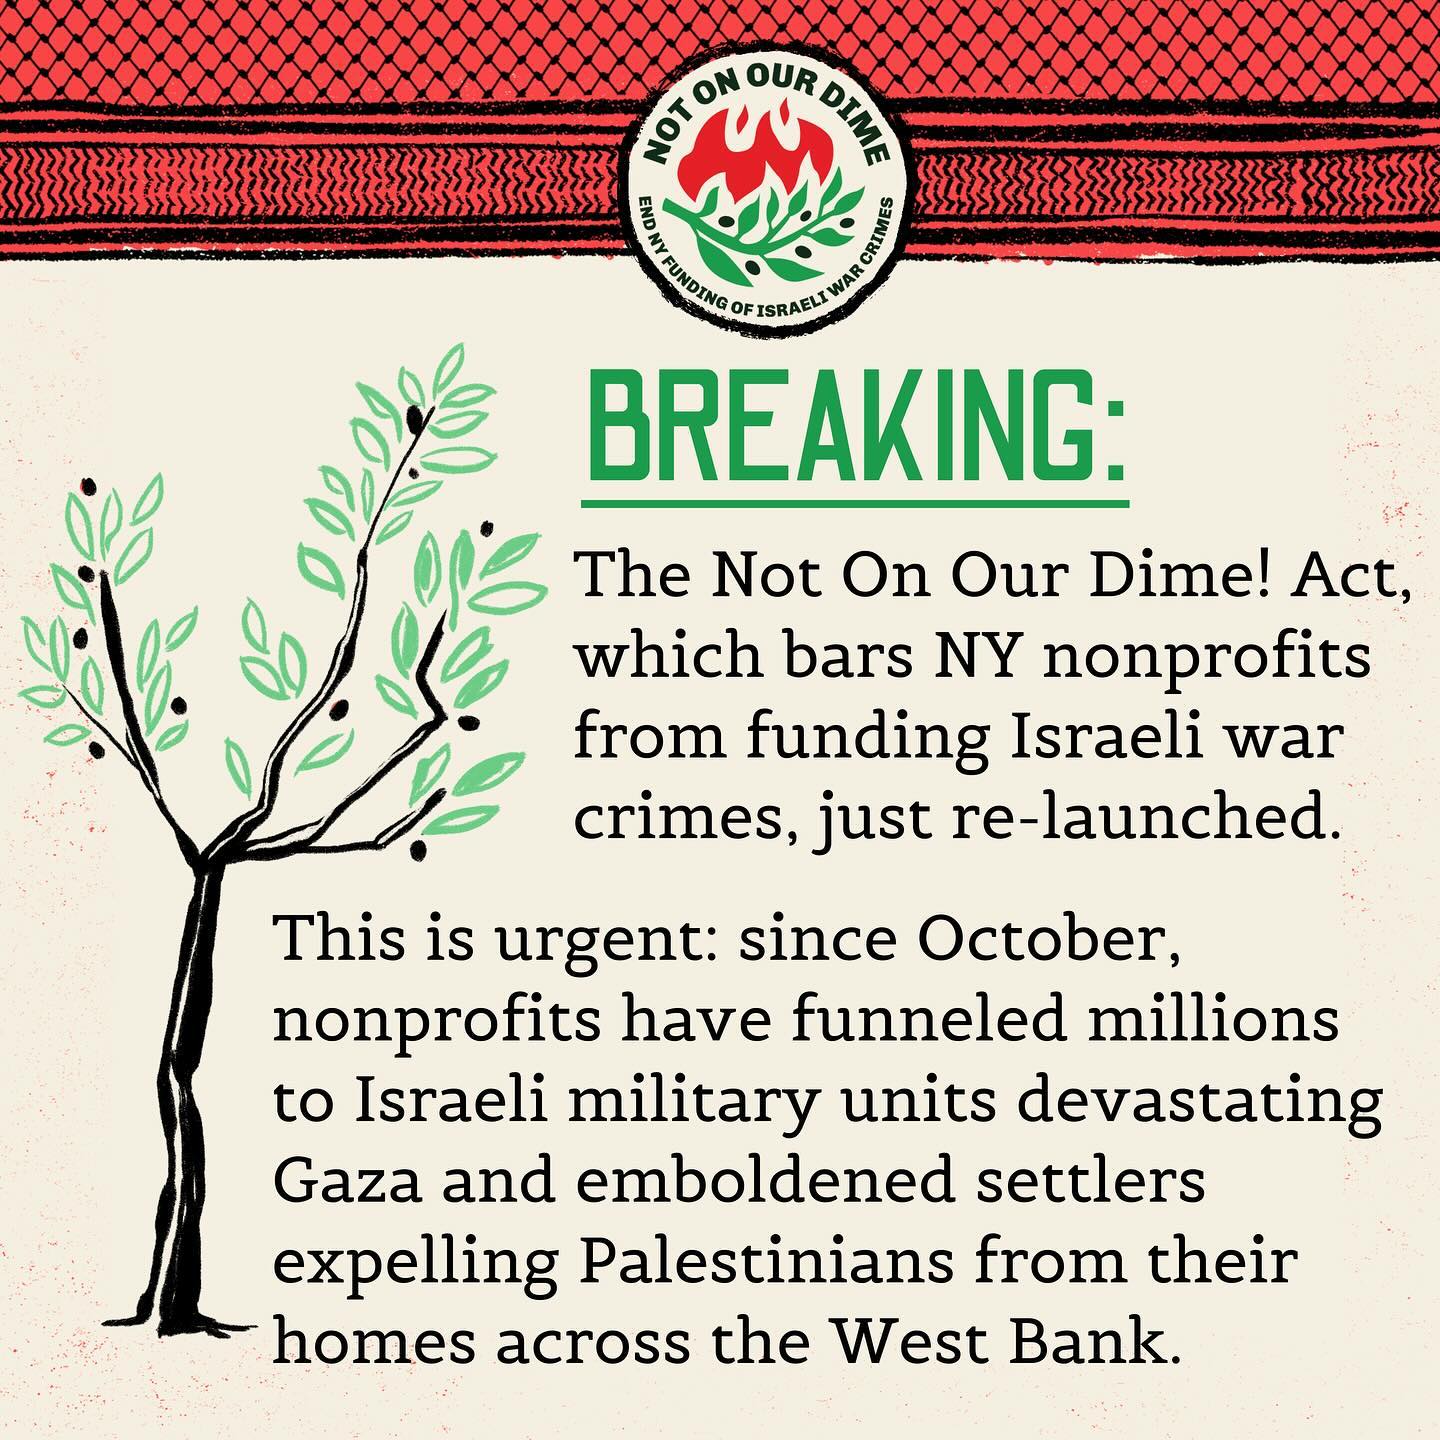 BREAKING: The Not On Our Dime! Act, which bars New York nonprofits from funding Israeli war crimes, was just re-introduced. This is urgent: since October, nonprofits have funneled millions to Israeli military units devastating Gaza and emboldened settlers expelling Palestinians from their homes across the West Bank.